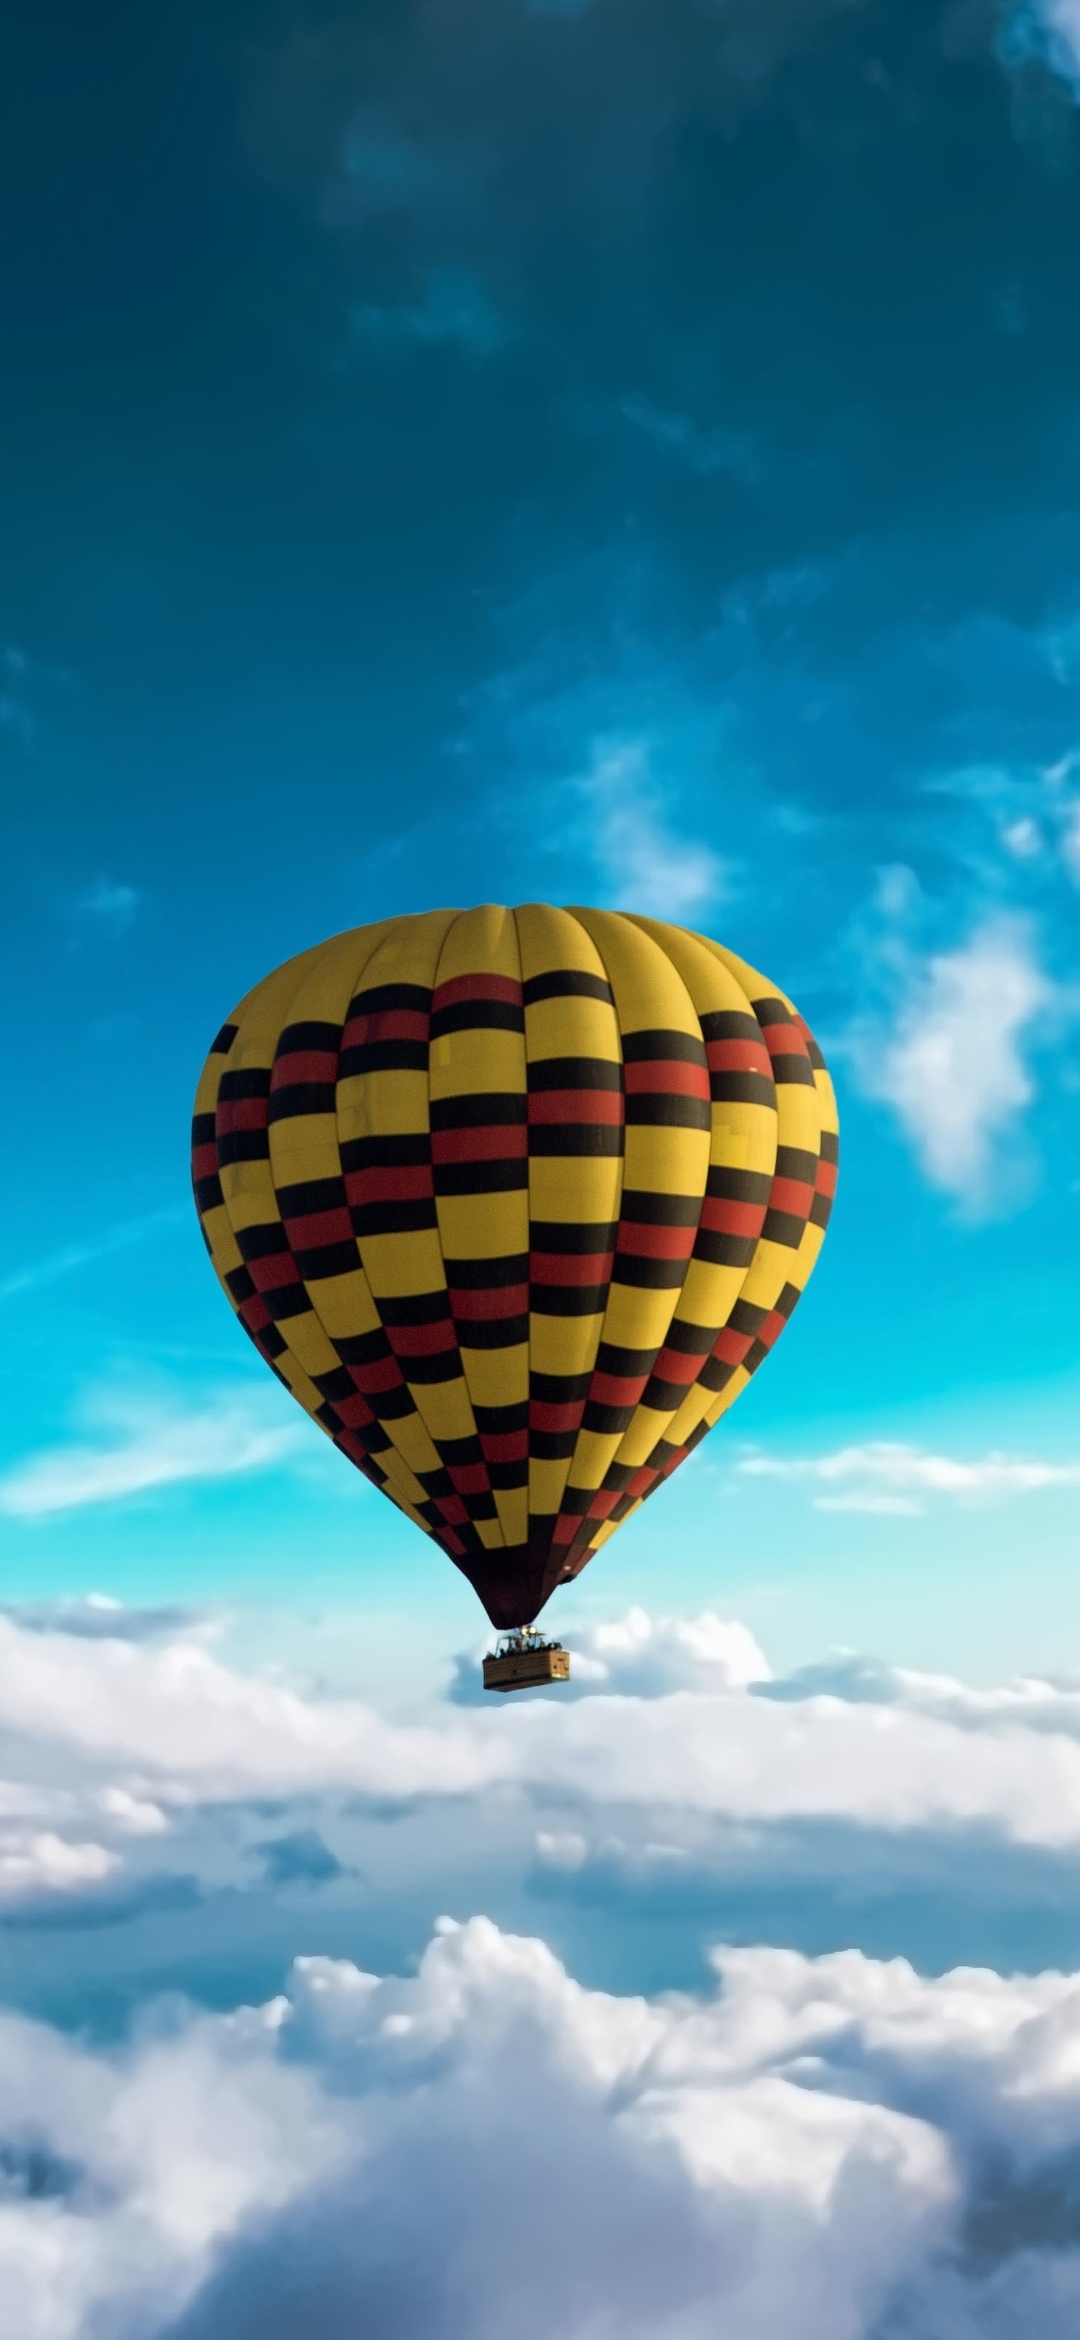 Image: Balloon, sky, clouds, flying, height